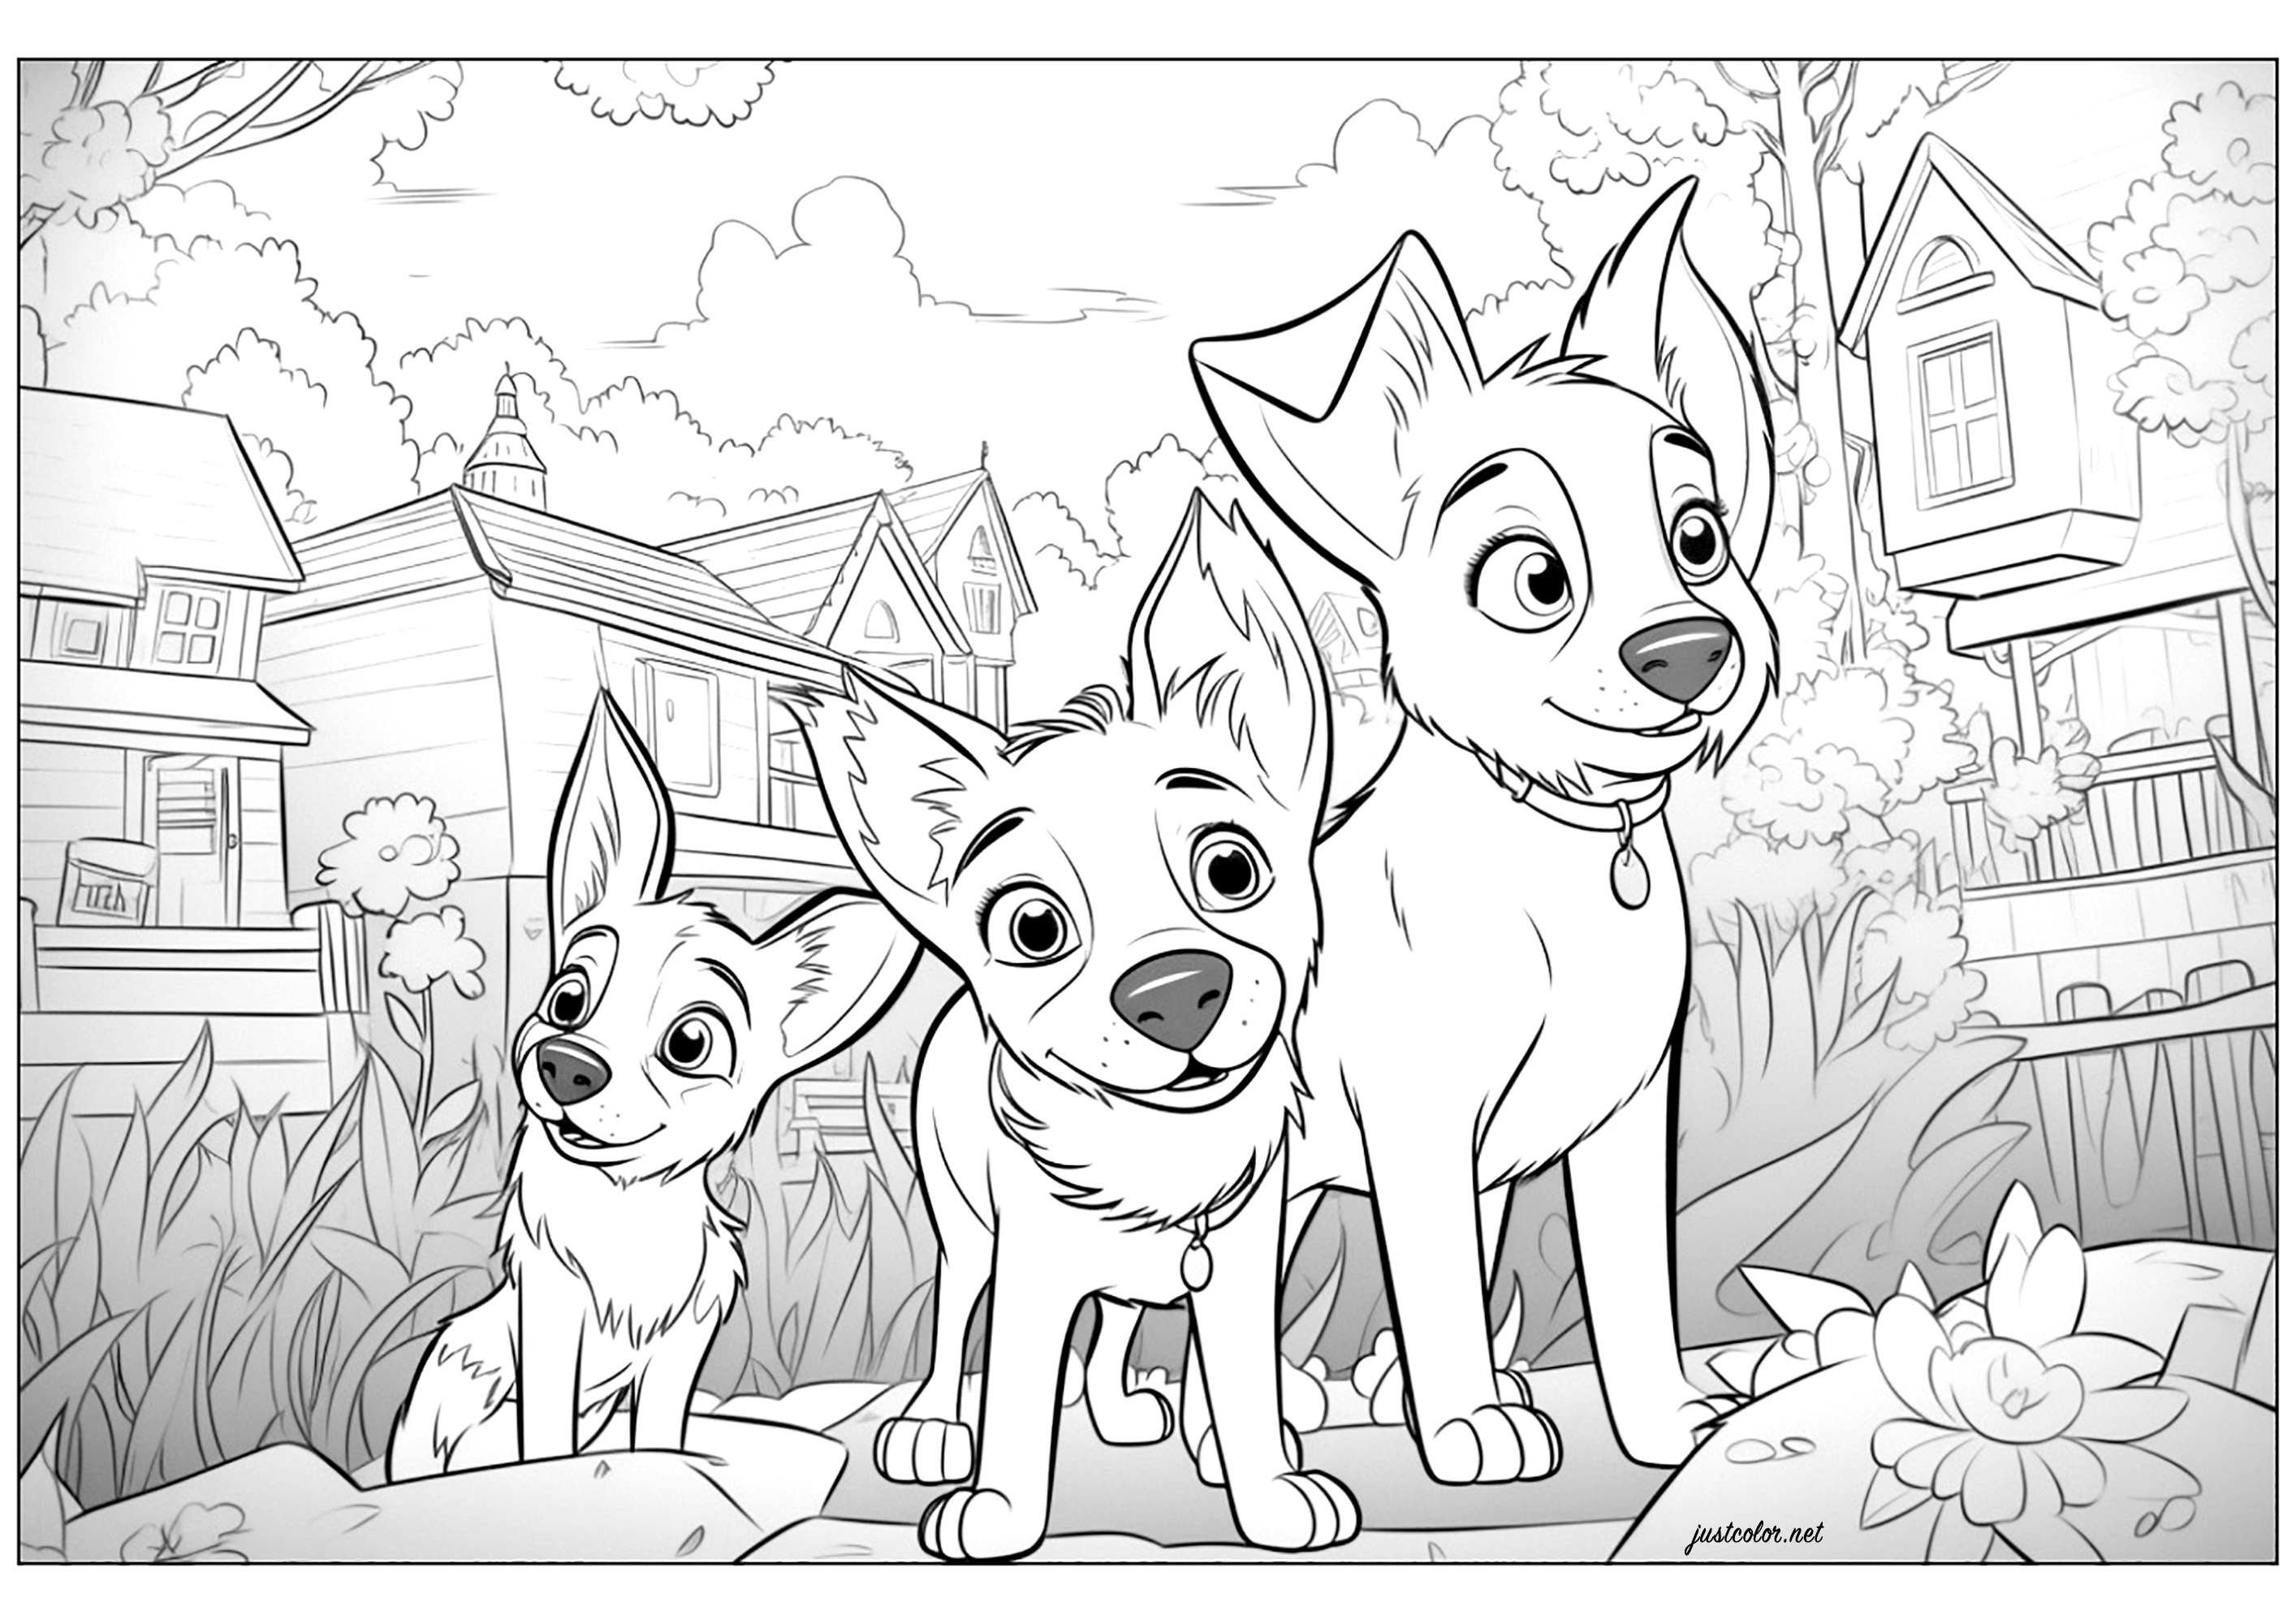 Three dogs drawn in Disney - Pixar style. Also color all the houses in the background of this original illustration.